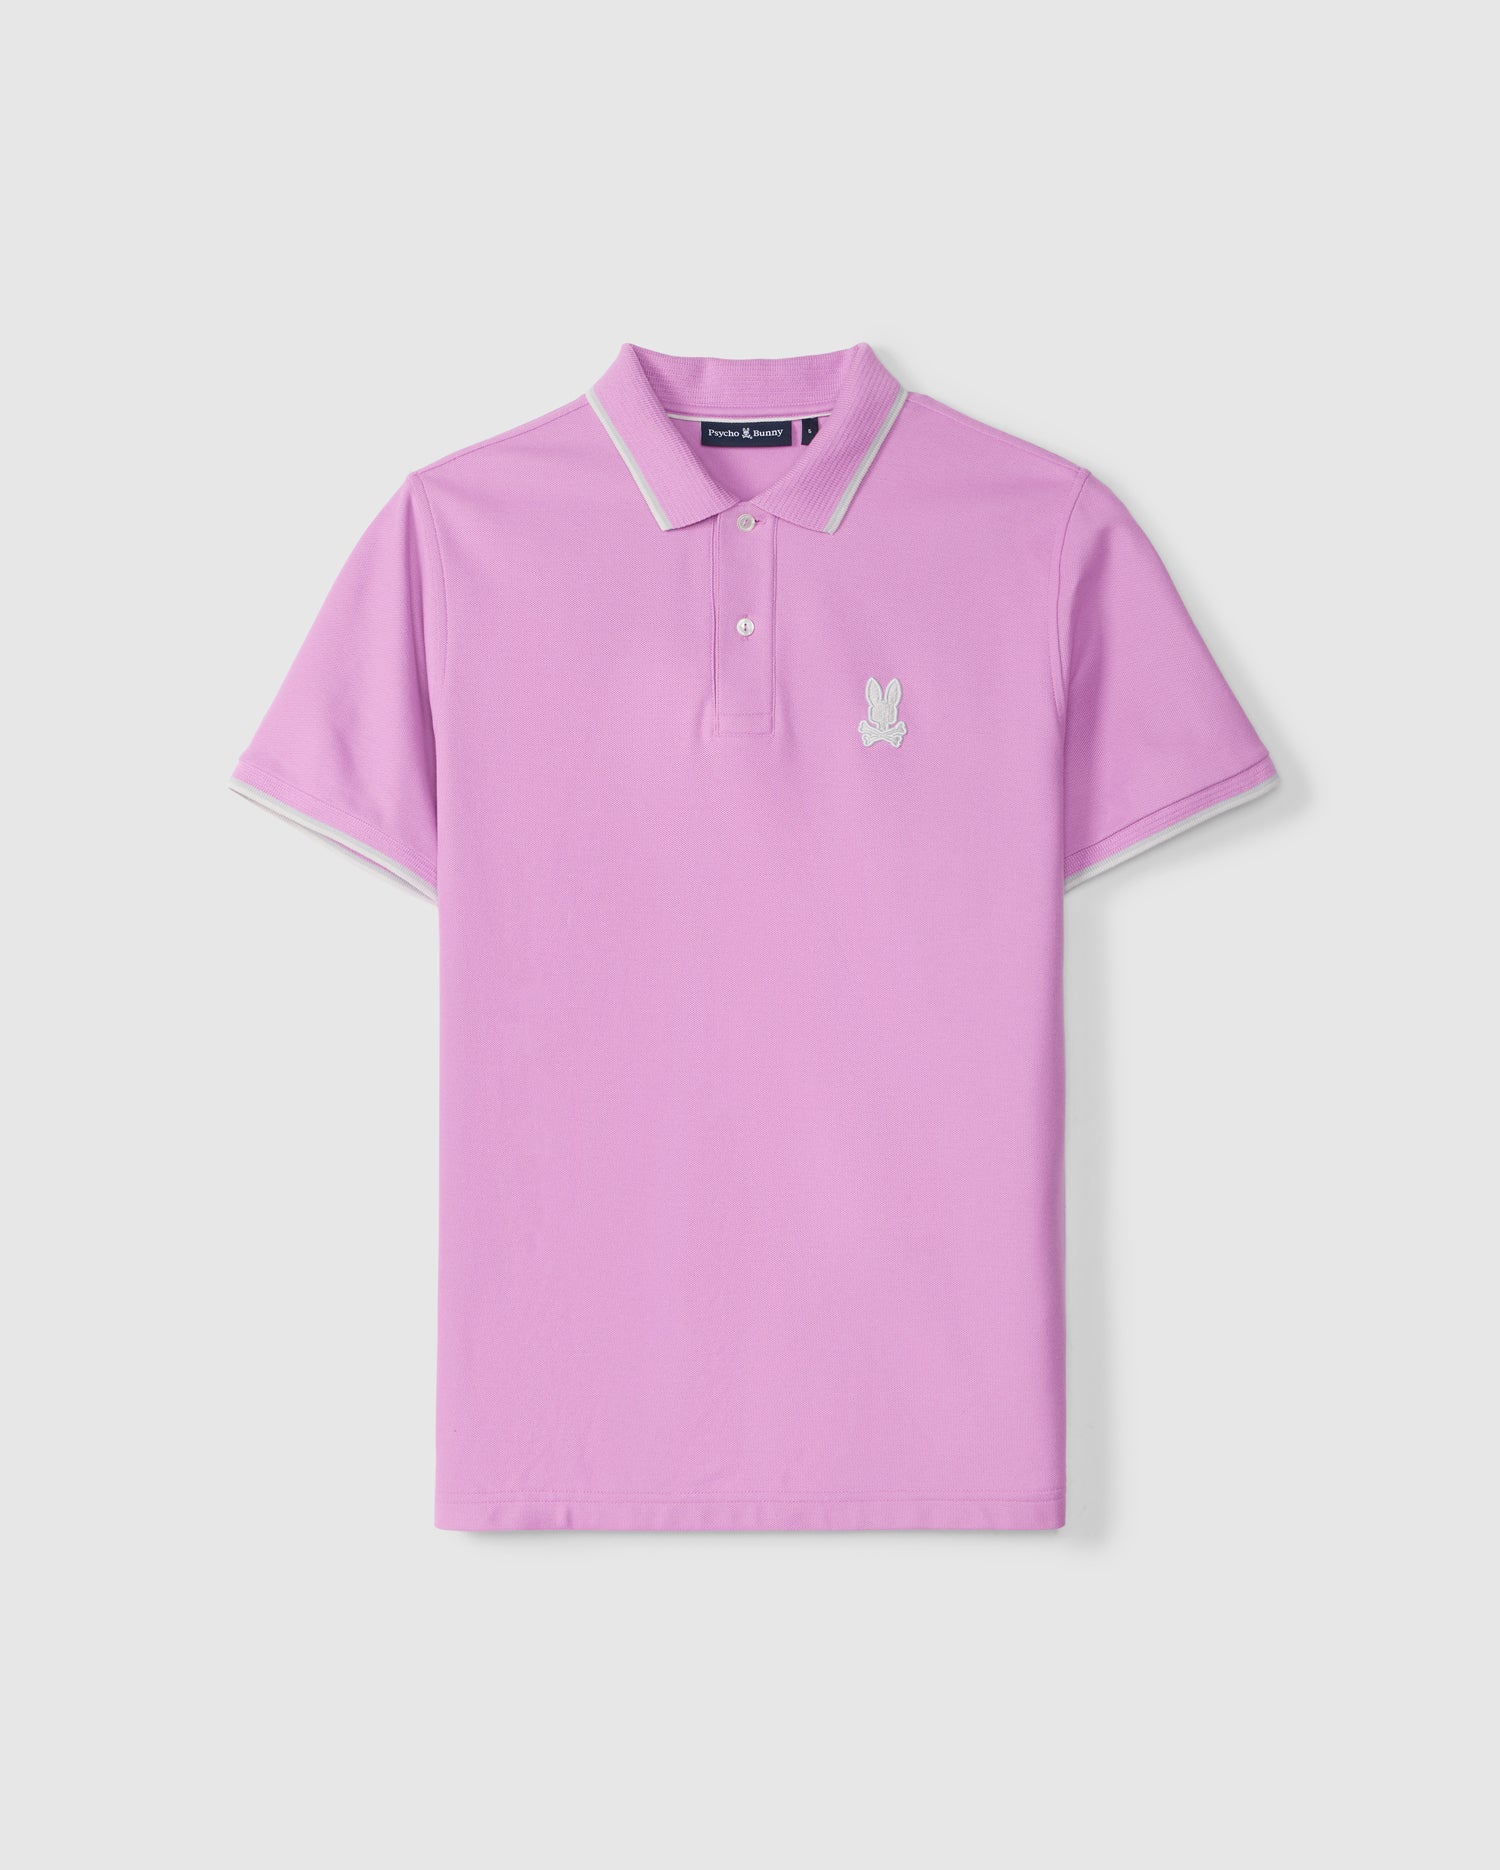 A purple MENS HOUSTON PIQUE POLO SHIRT - B6K604C200 with a collar and white trim on the sleeve edges. It features an embroidered white bunny logo on the left chest, showcasing its luxury finishes by Psycho Bunny.